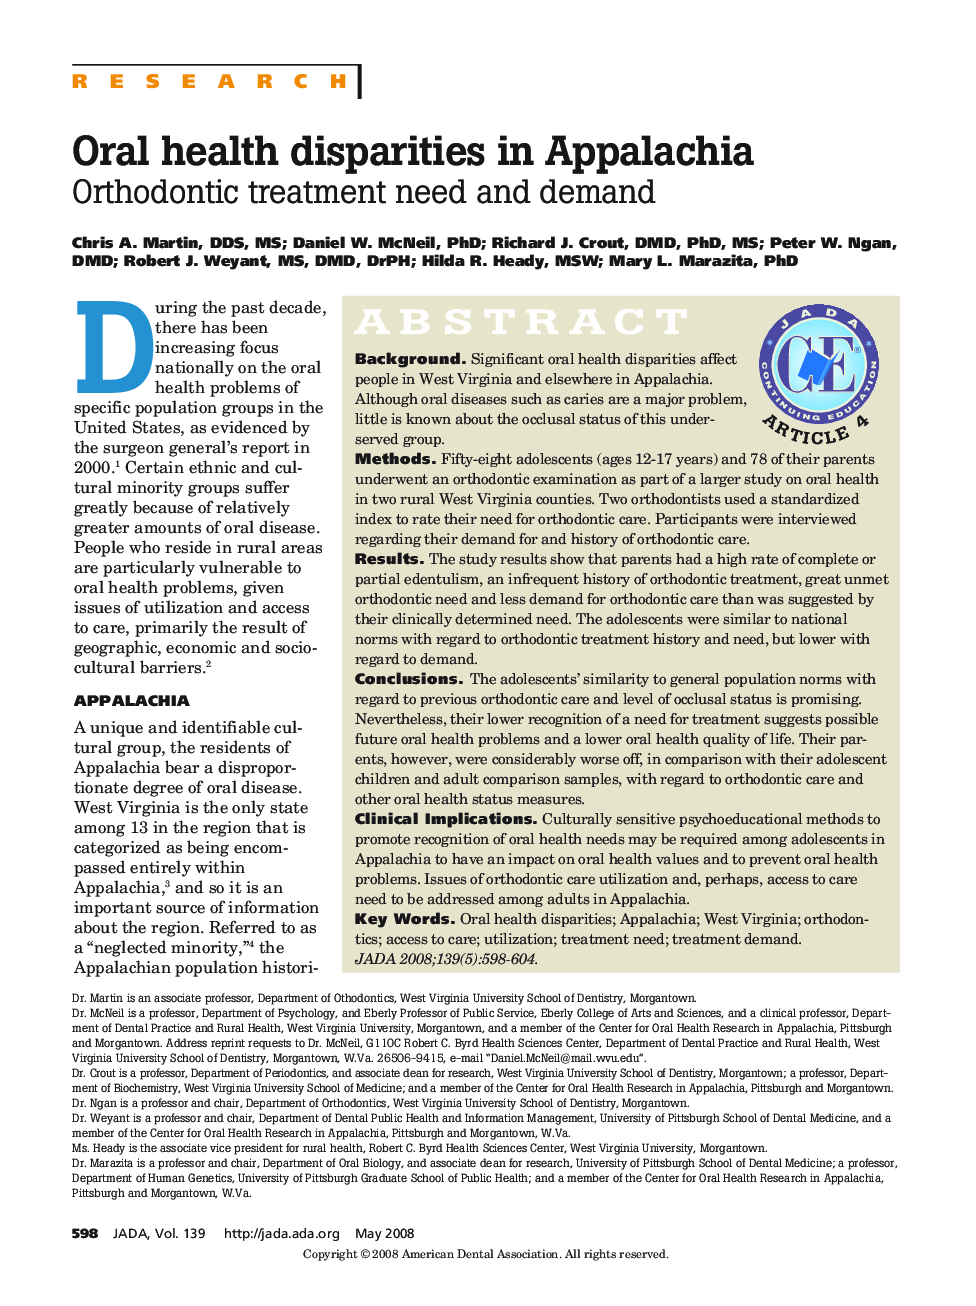 Oral Health Disparities in Appalachia : Orthodontic Treatment Need and Demand